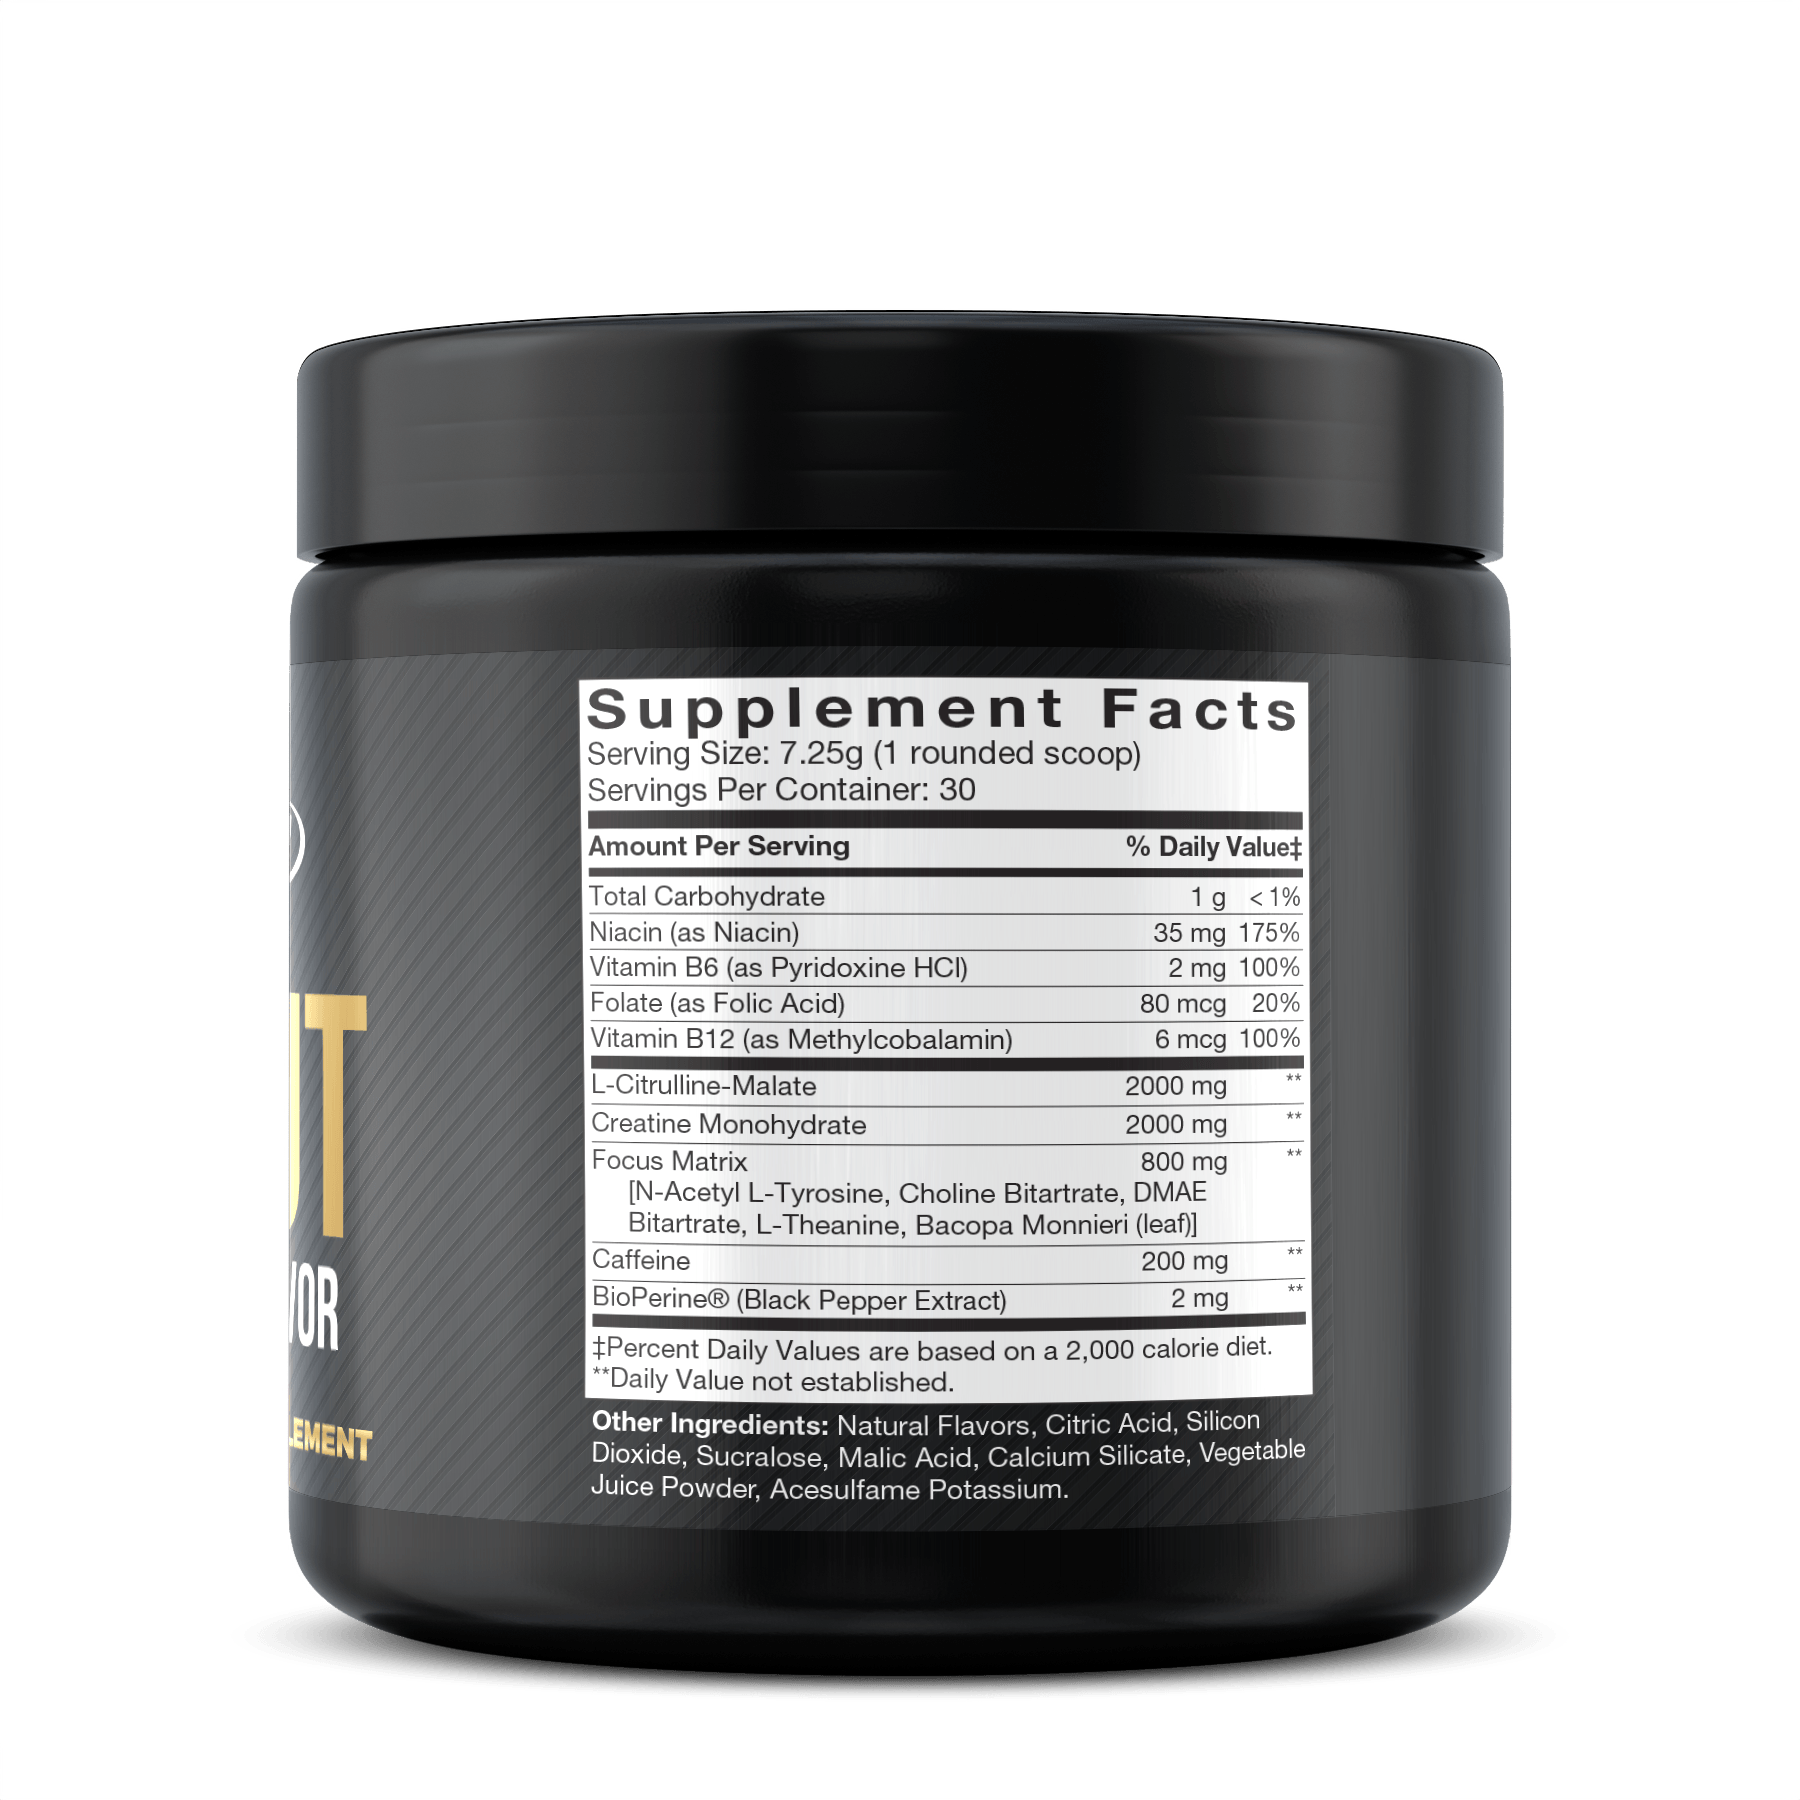 Pre-Workout, Fruit Punch, 214g/7.25g serv./30 serv. – Rip Toned